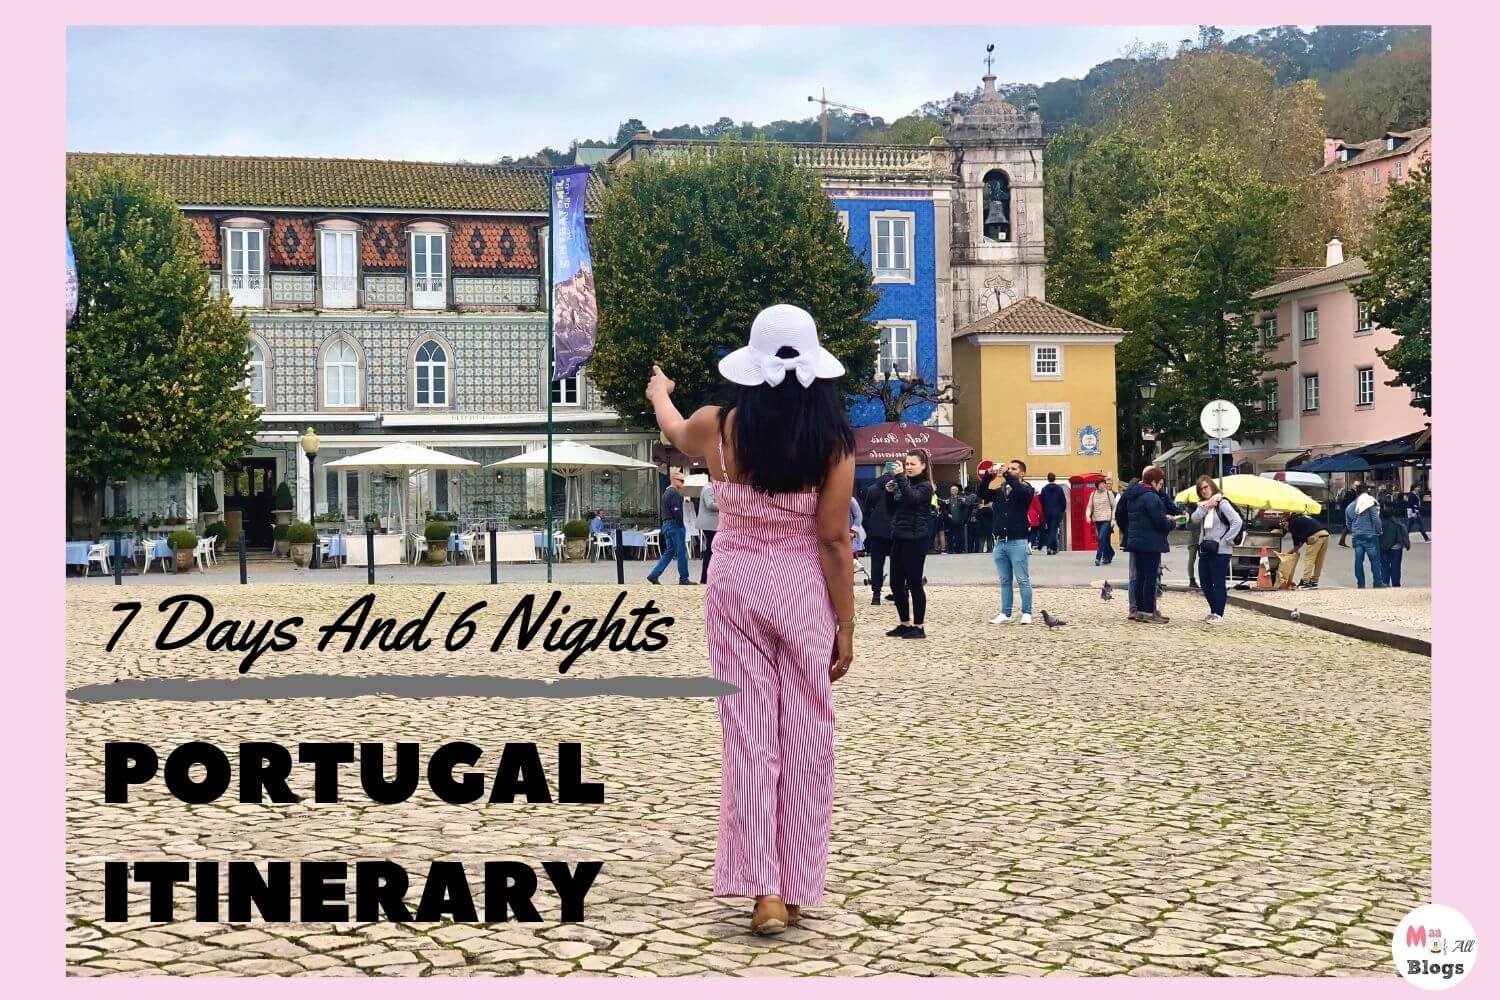 7 days and 6 nights in Portugal